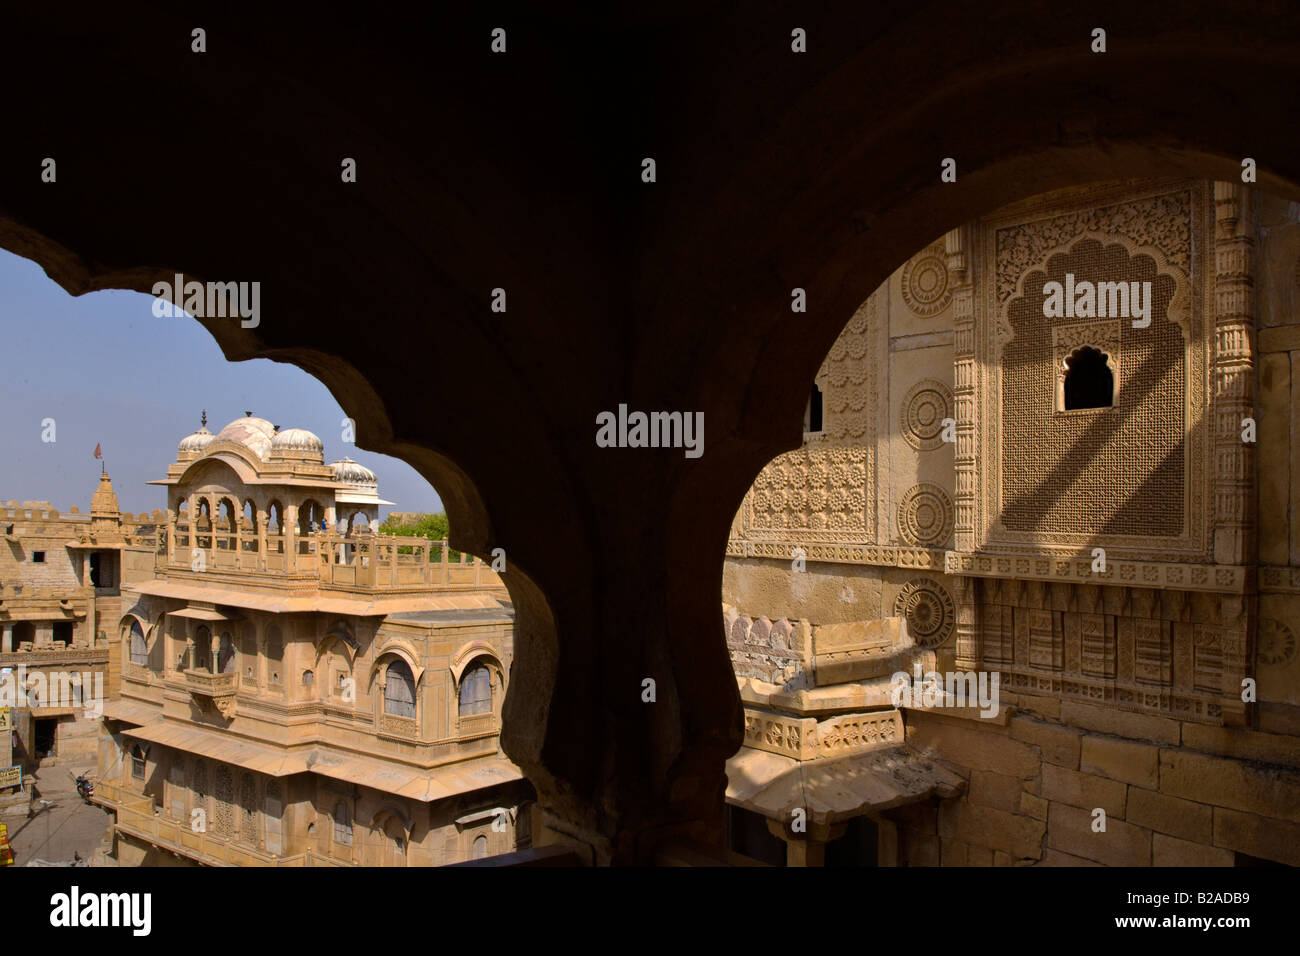 Intricately carved sandstone screens decorate the exterior of the MAHARAJAS PALACE located inside JAISALMER FORT RAJASTHAN INDIA Stock Photo